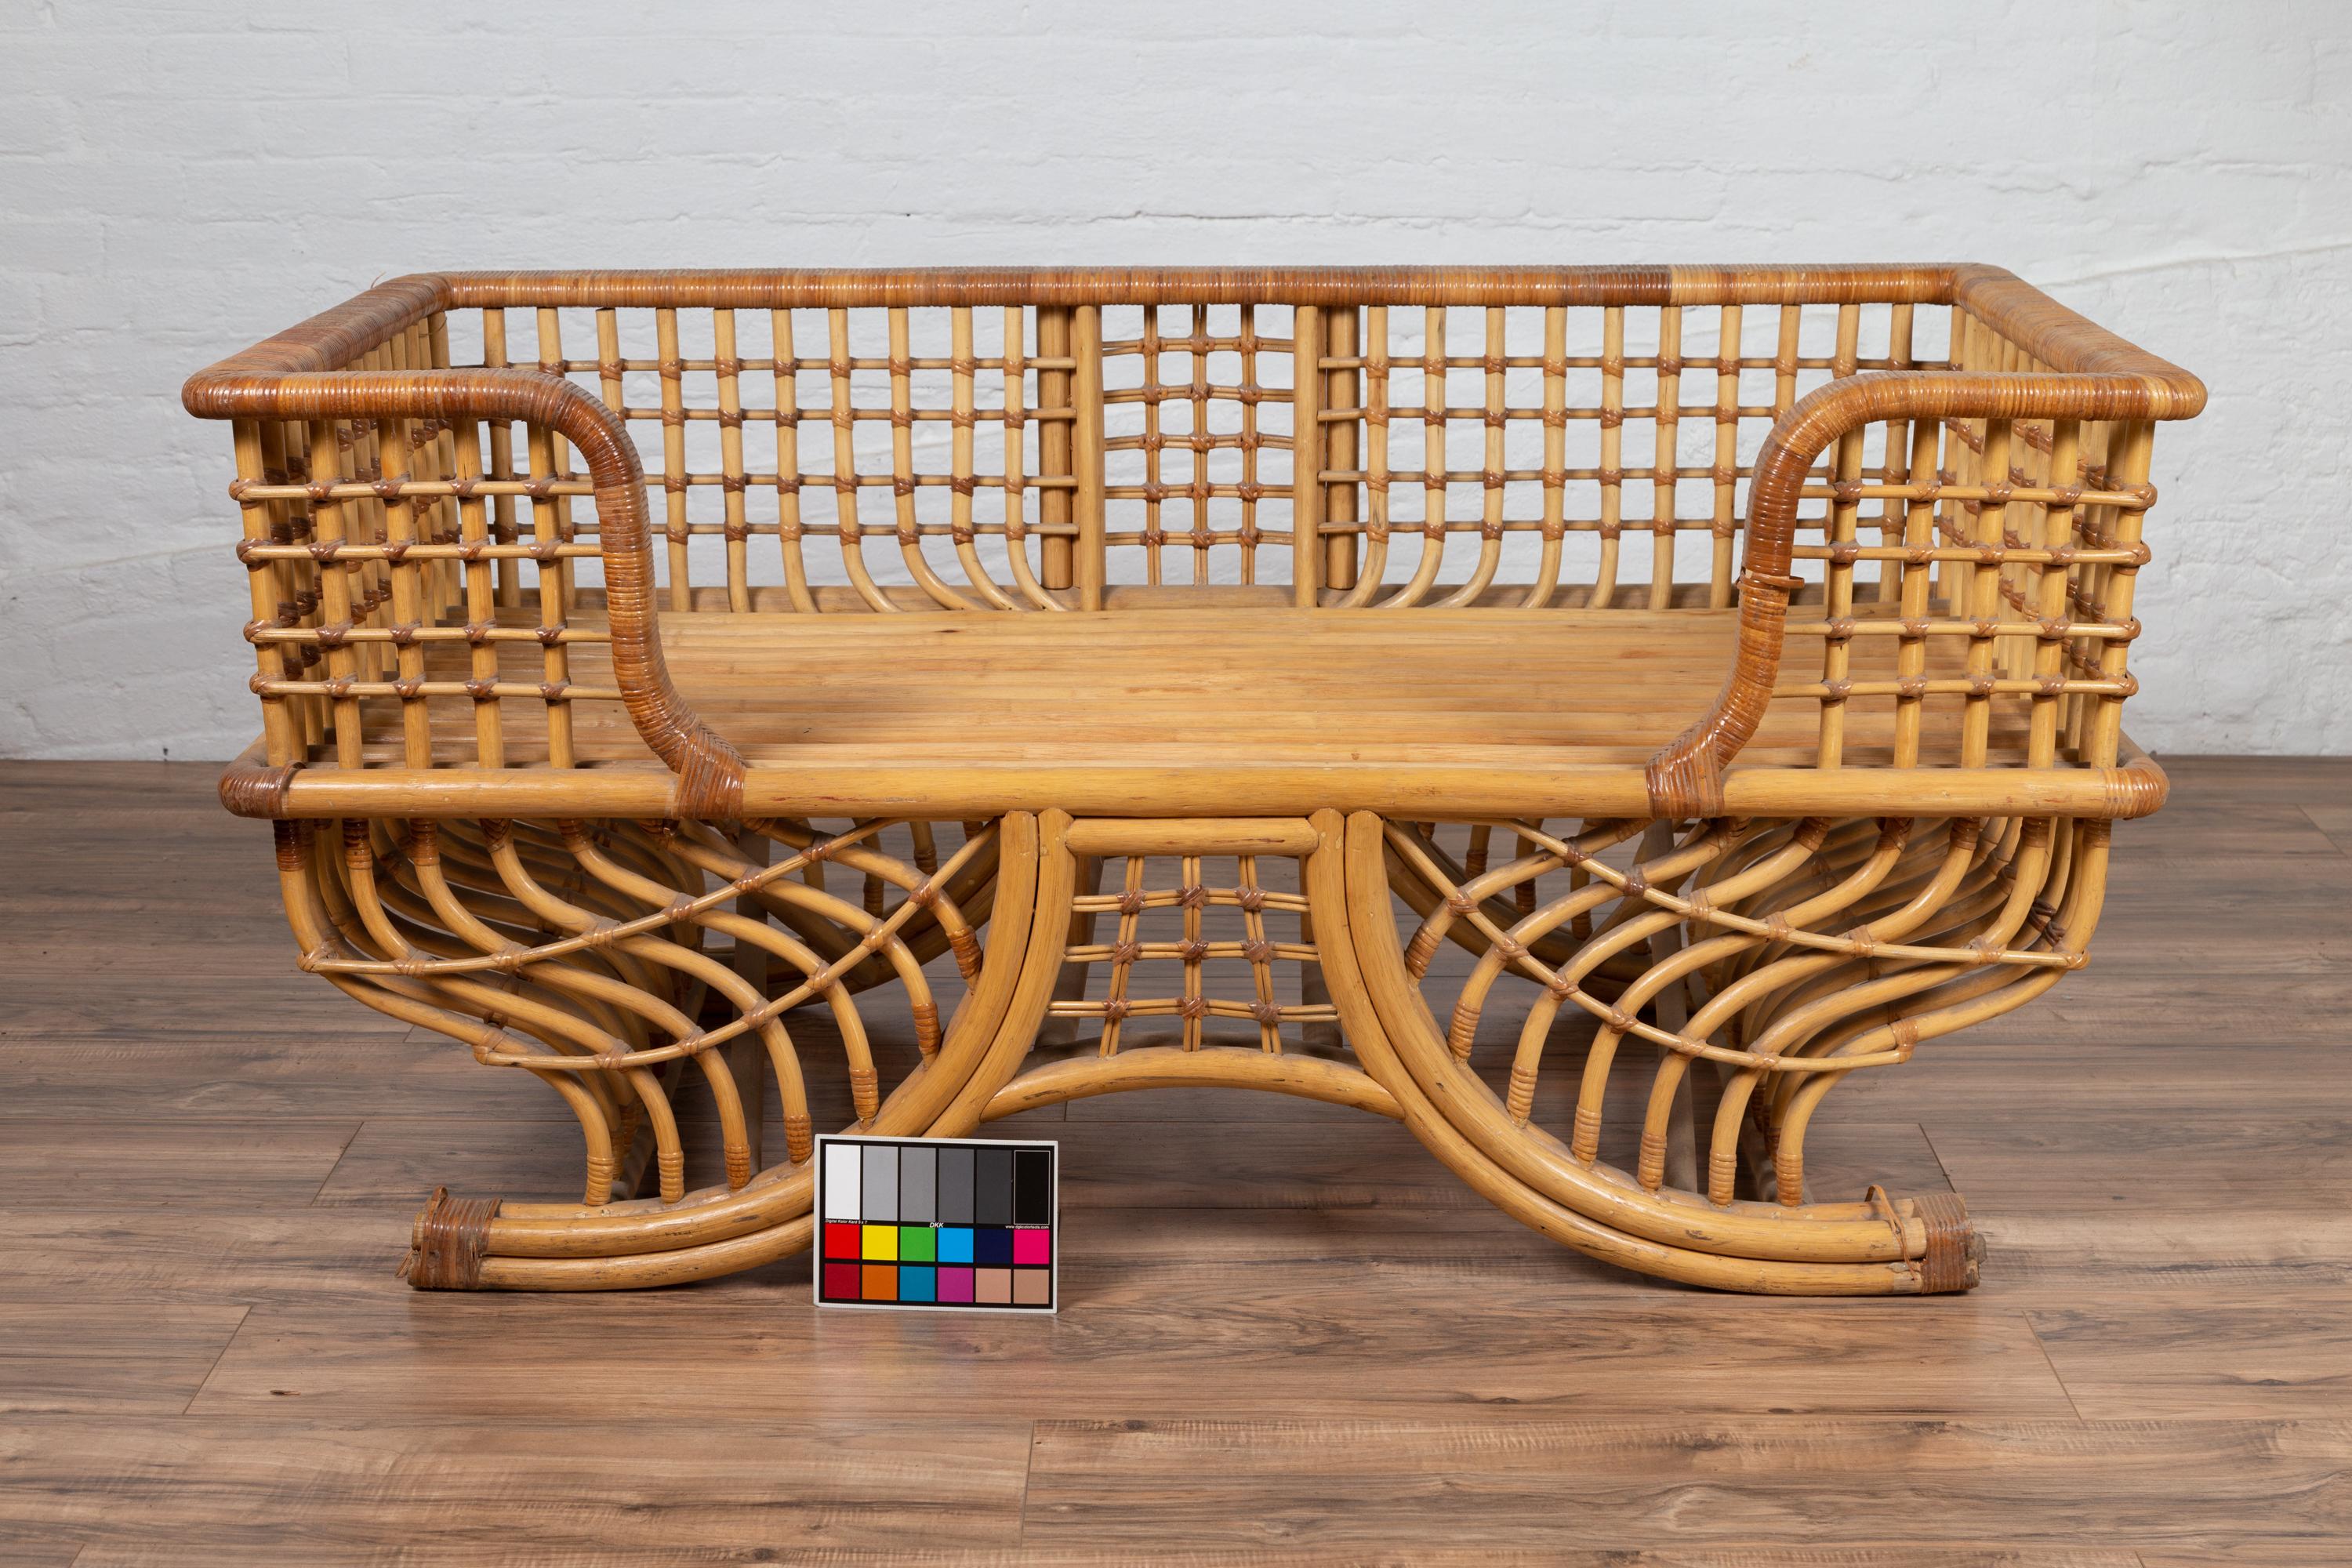 Indian Bamboo Howdah Settee Original Used for Sitting on an Elephant 5